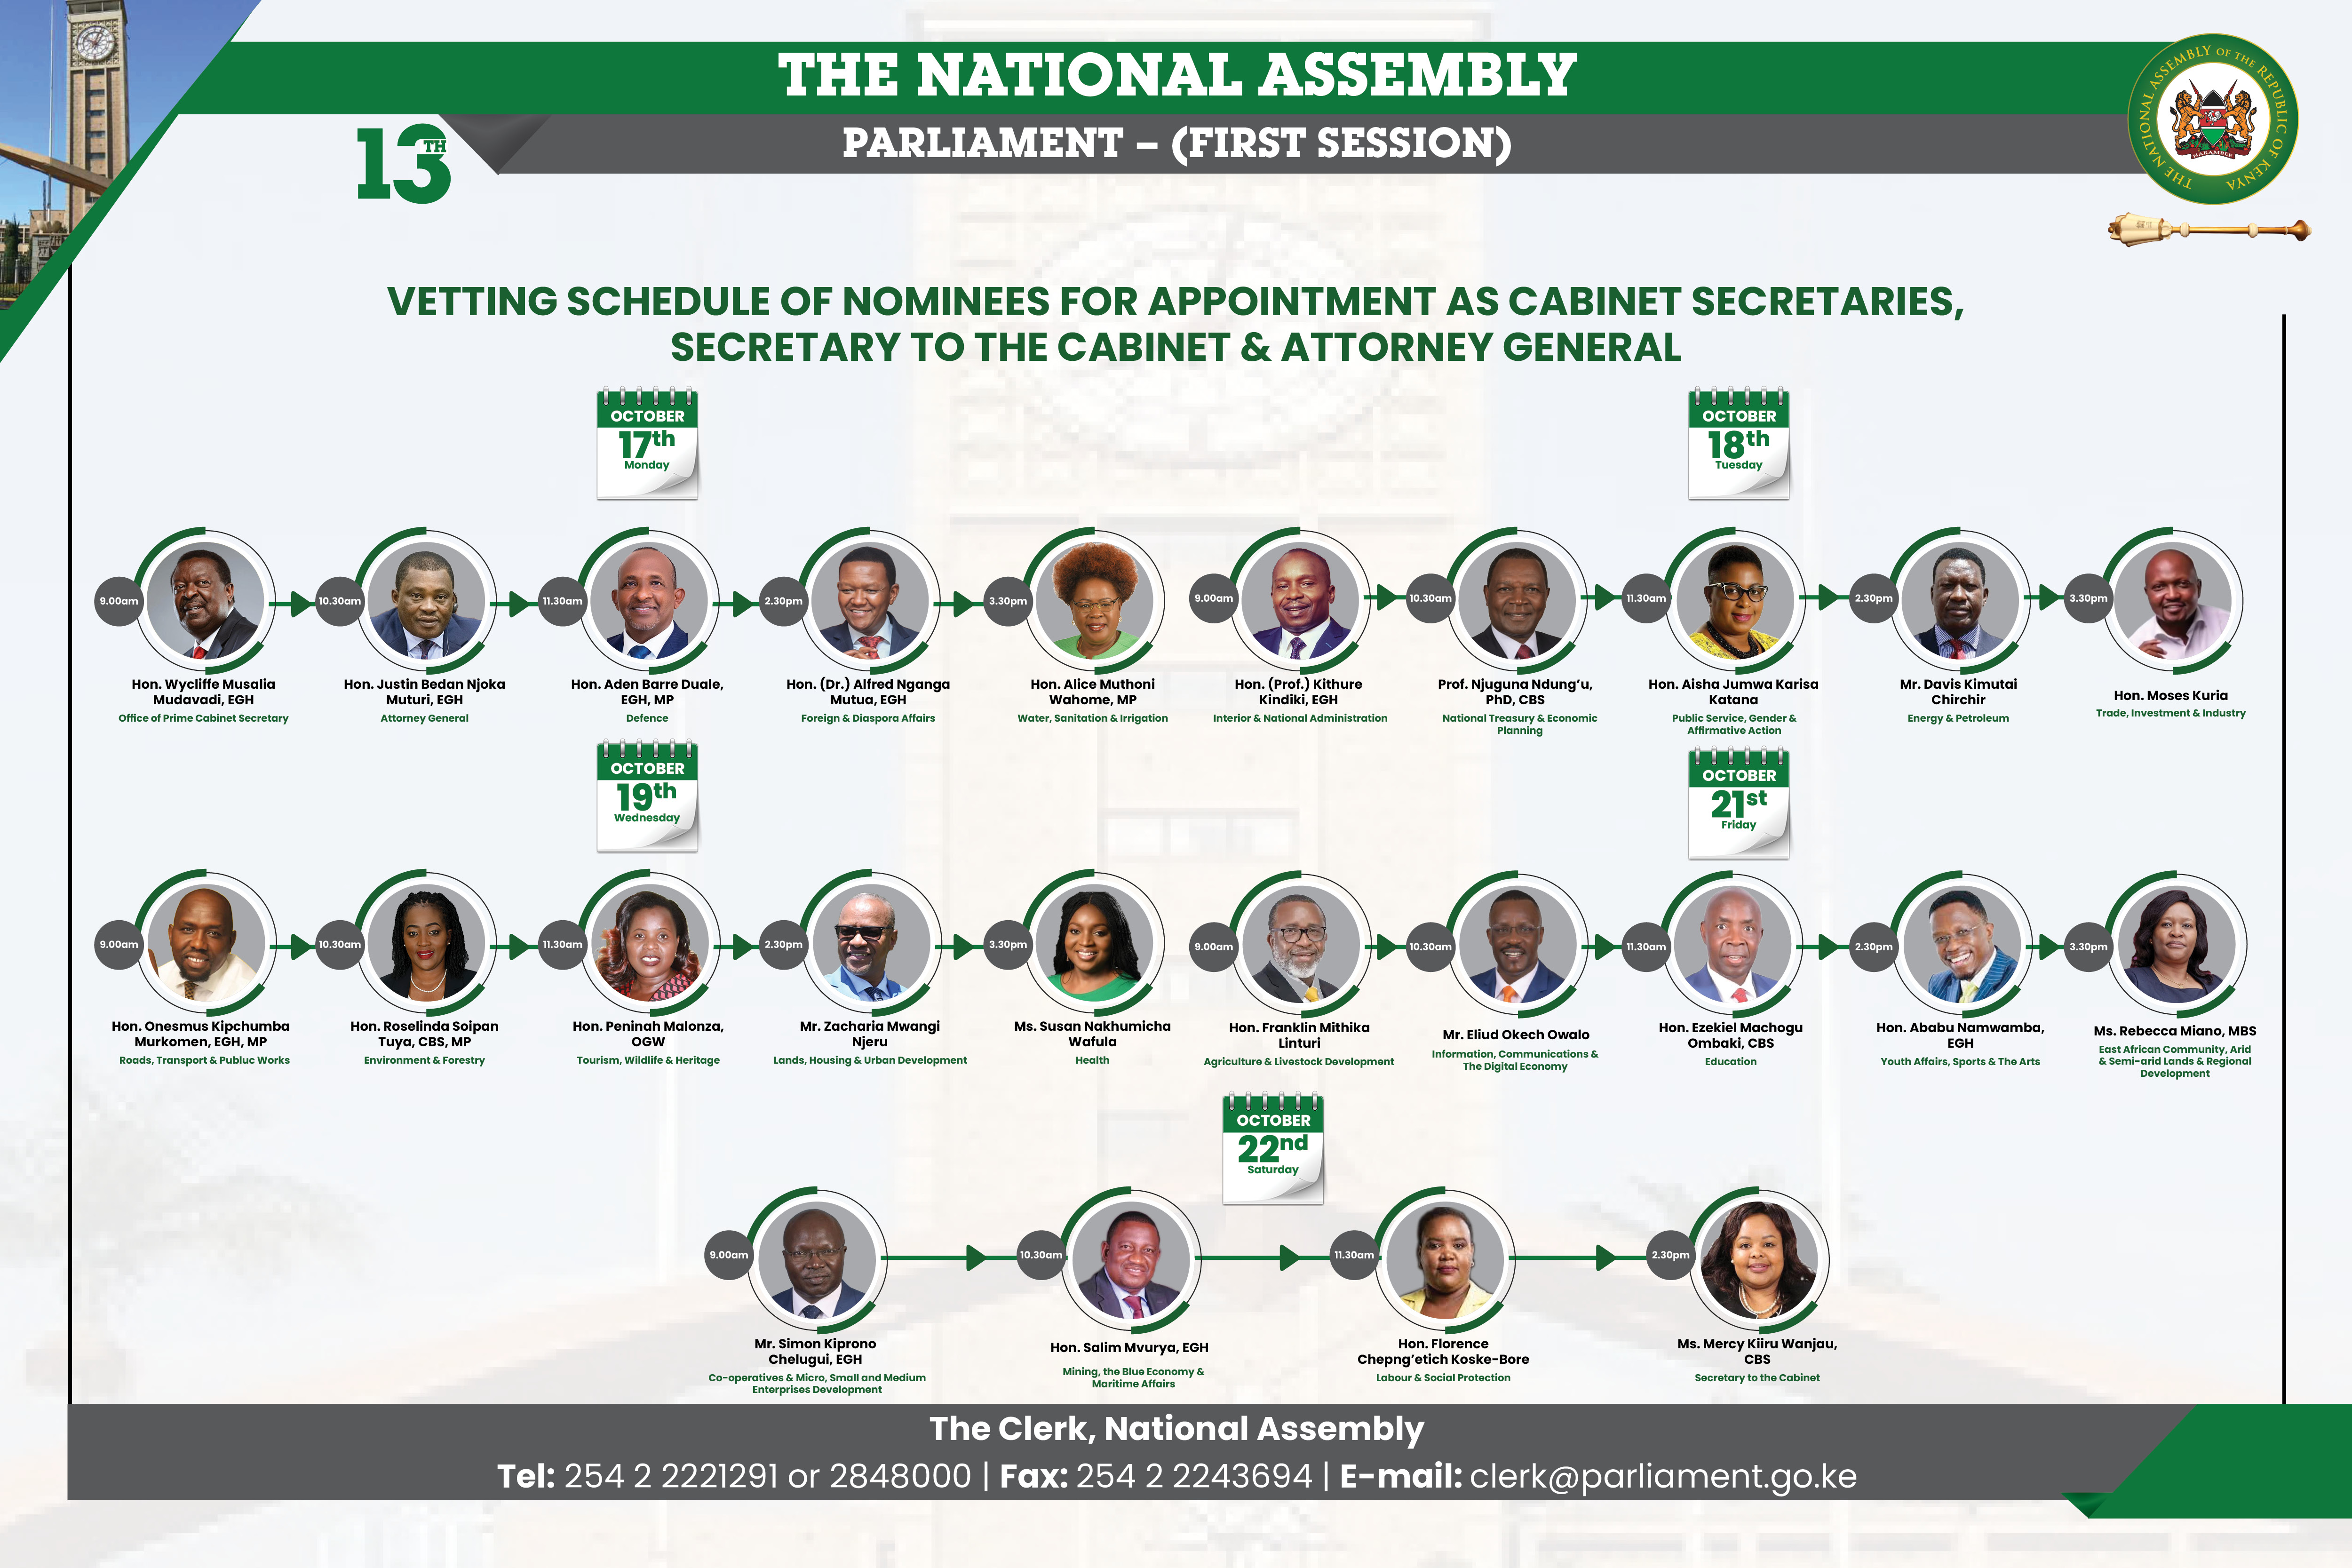 The National Assembly’s Committee on Appointment Commences vetting of Persons Nominated for Appointment as Cabinet Secretaries, Attorney General, and Secretary to the Cabinet